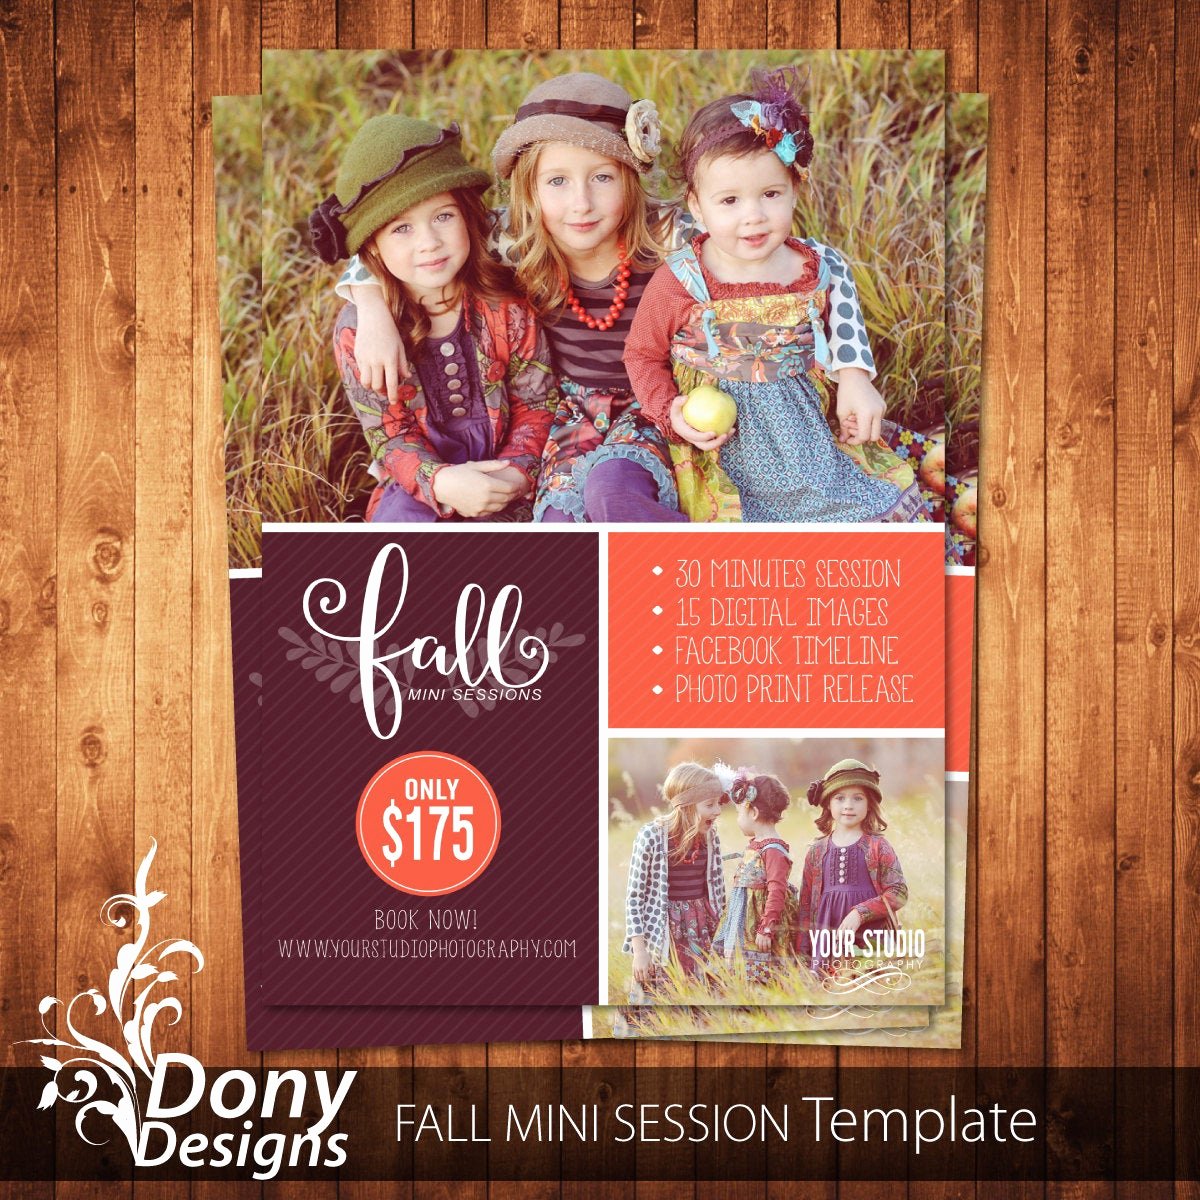 Photography Marketing Templates Free Awesome Fall Mini Session Template Graphy Marketing by Donydesigns